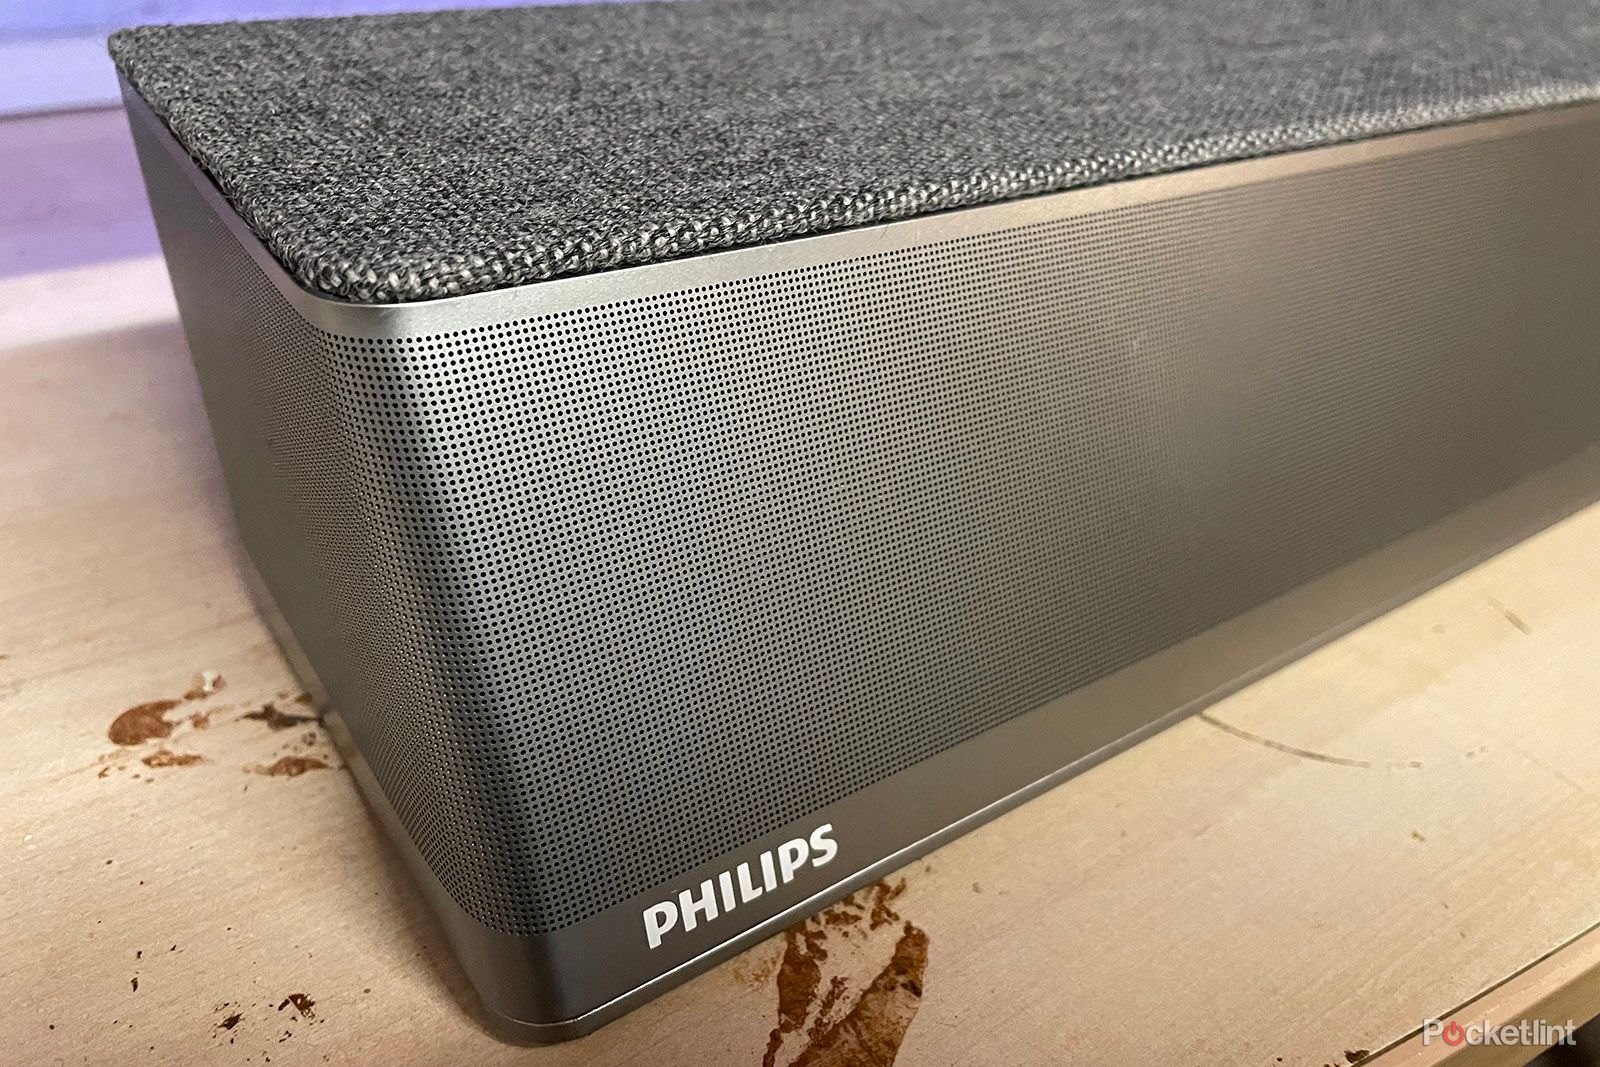 Hands on: Philips OLED+936 review